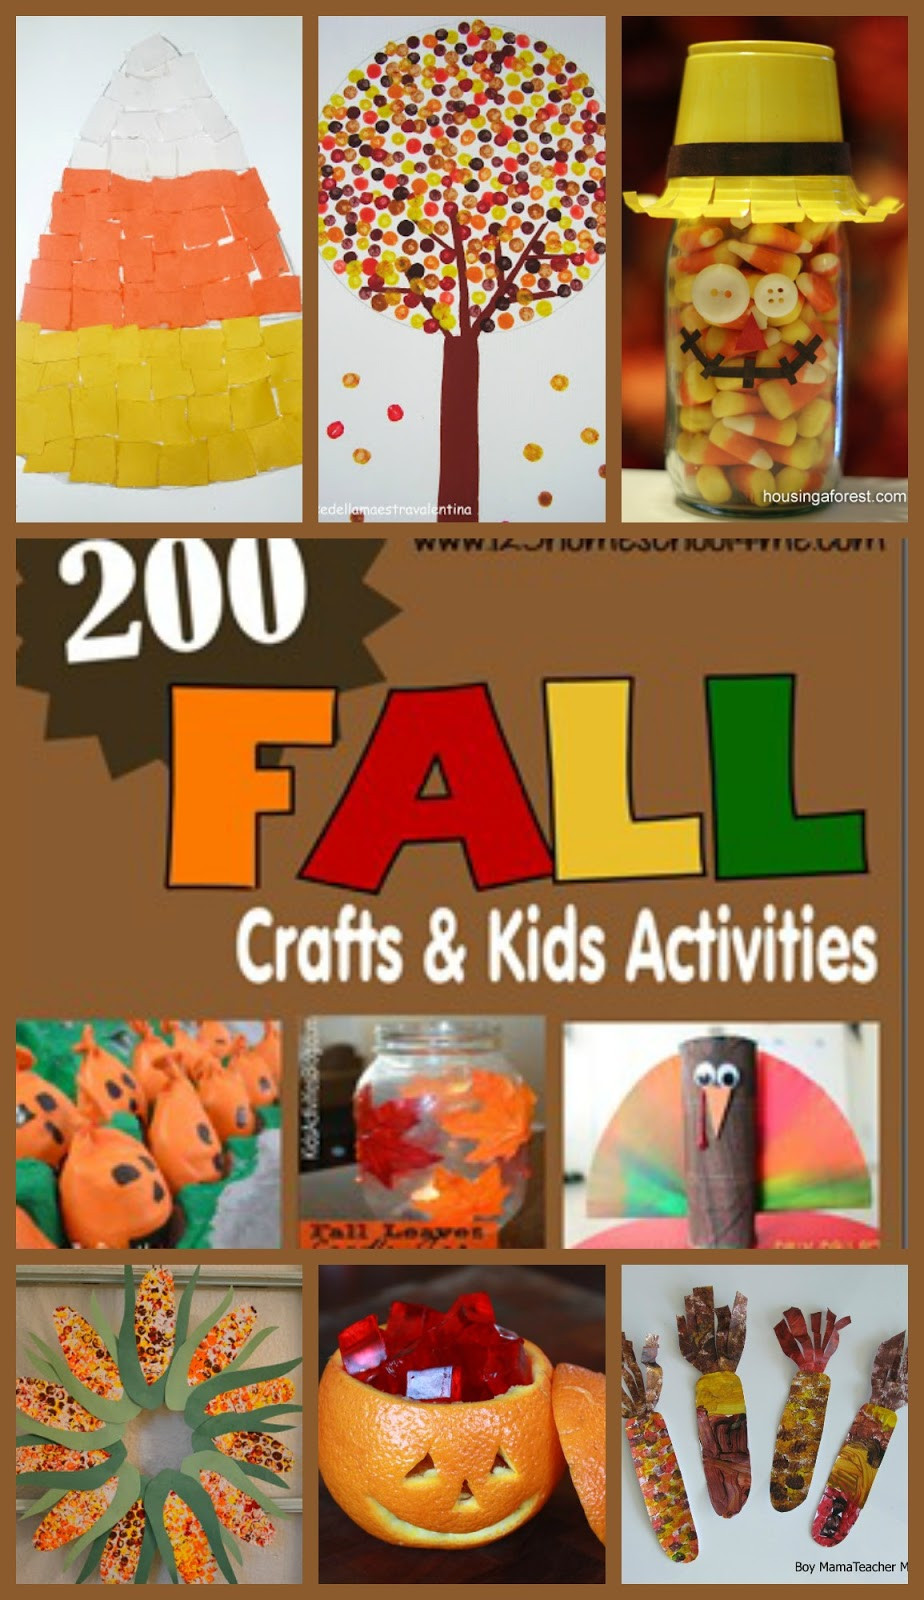 Fall Preschool Craft Ideas
 200 Fall Crafts Kids Activities Printables and Snack Ideas